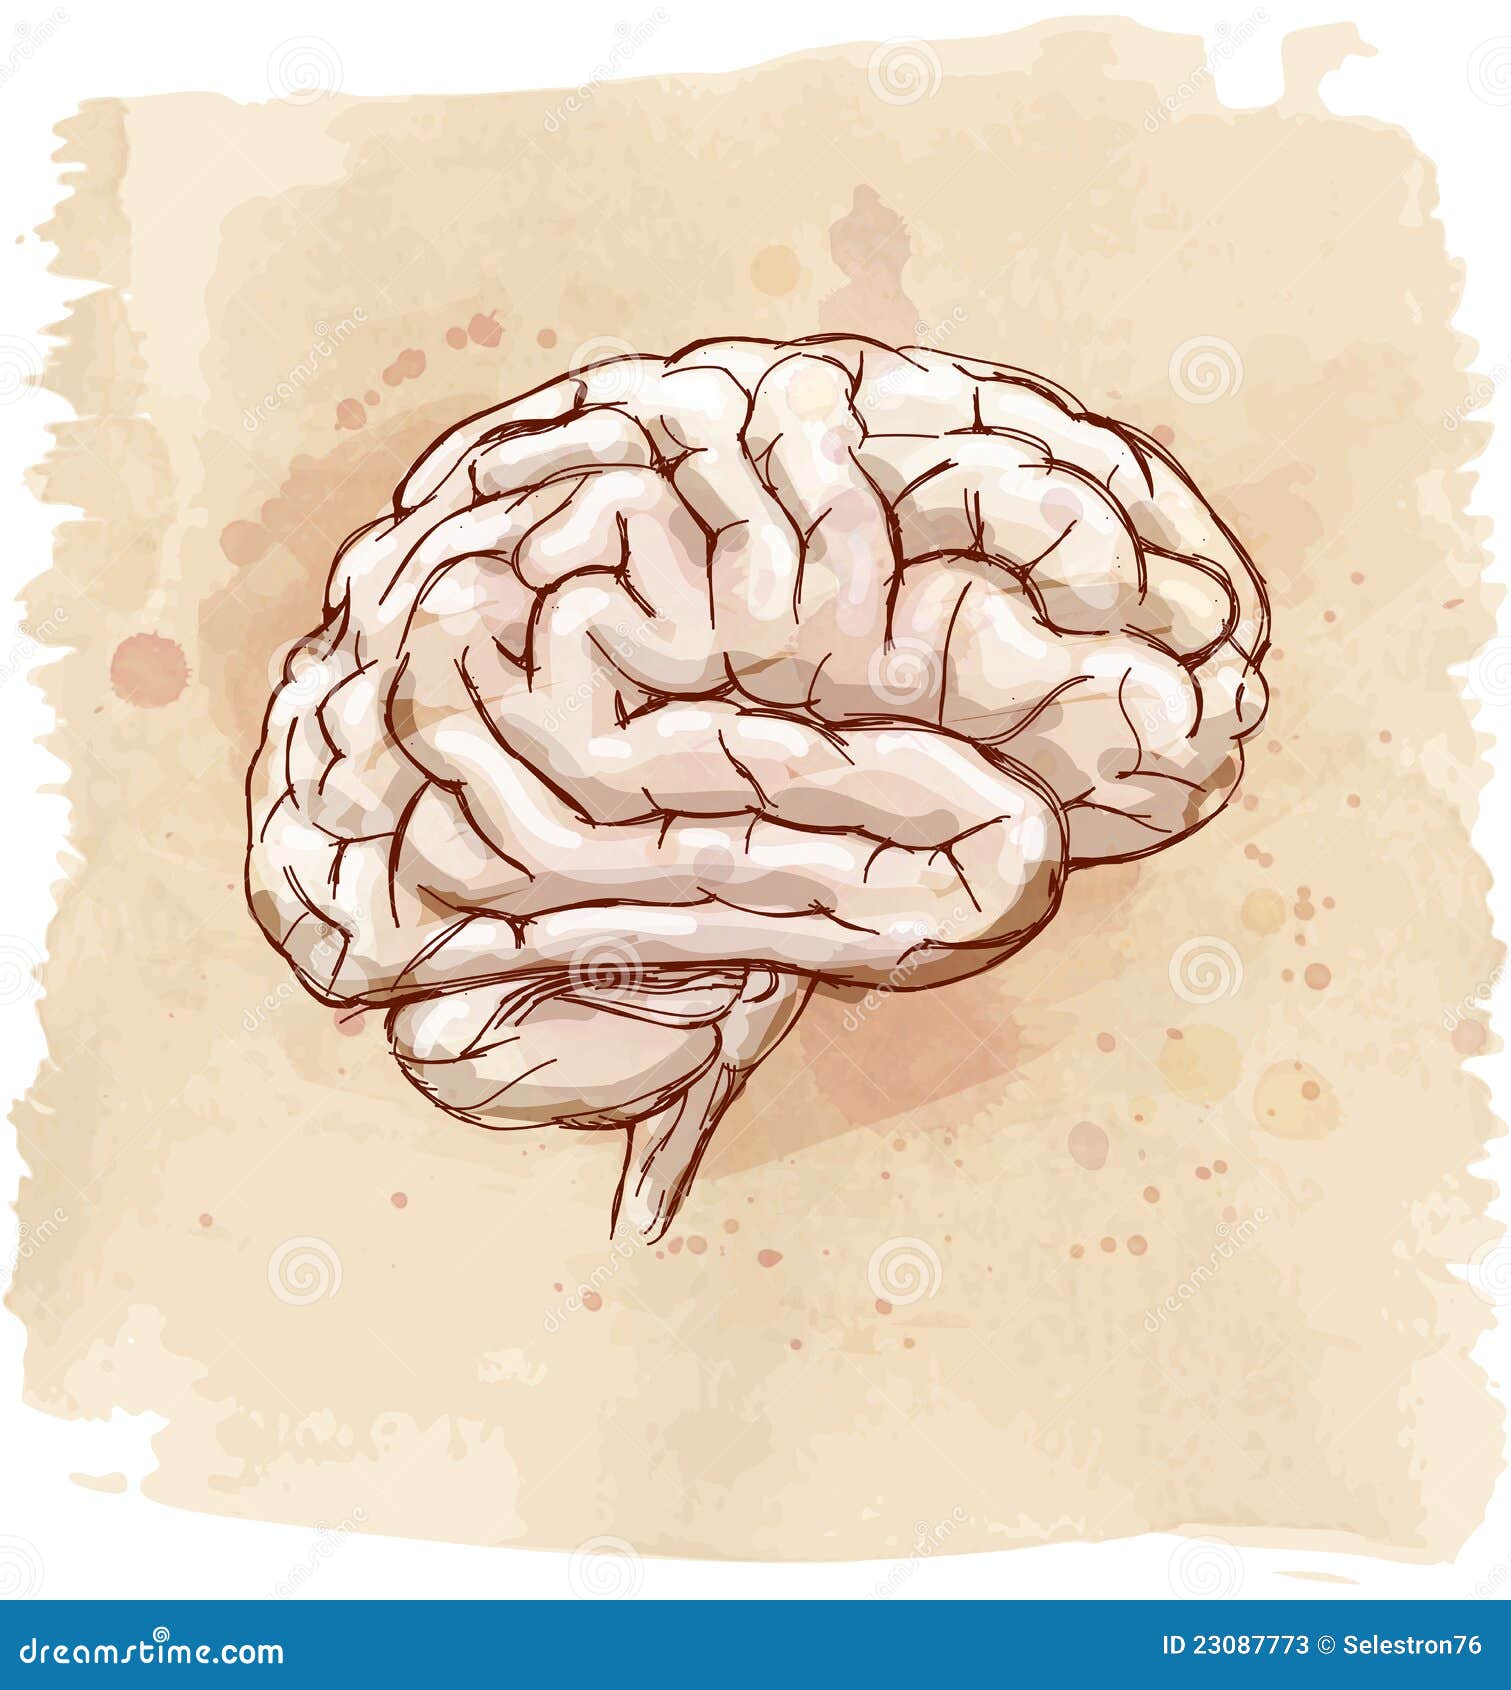 The Cerebellum's Functions in Cognition, Emotion, and More | TS Digest |  The Scientist